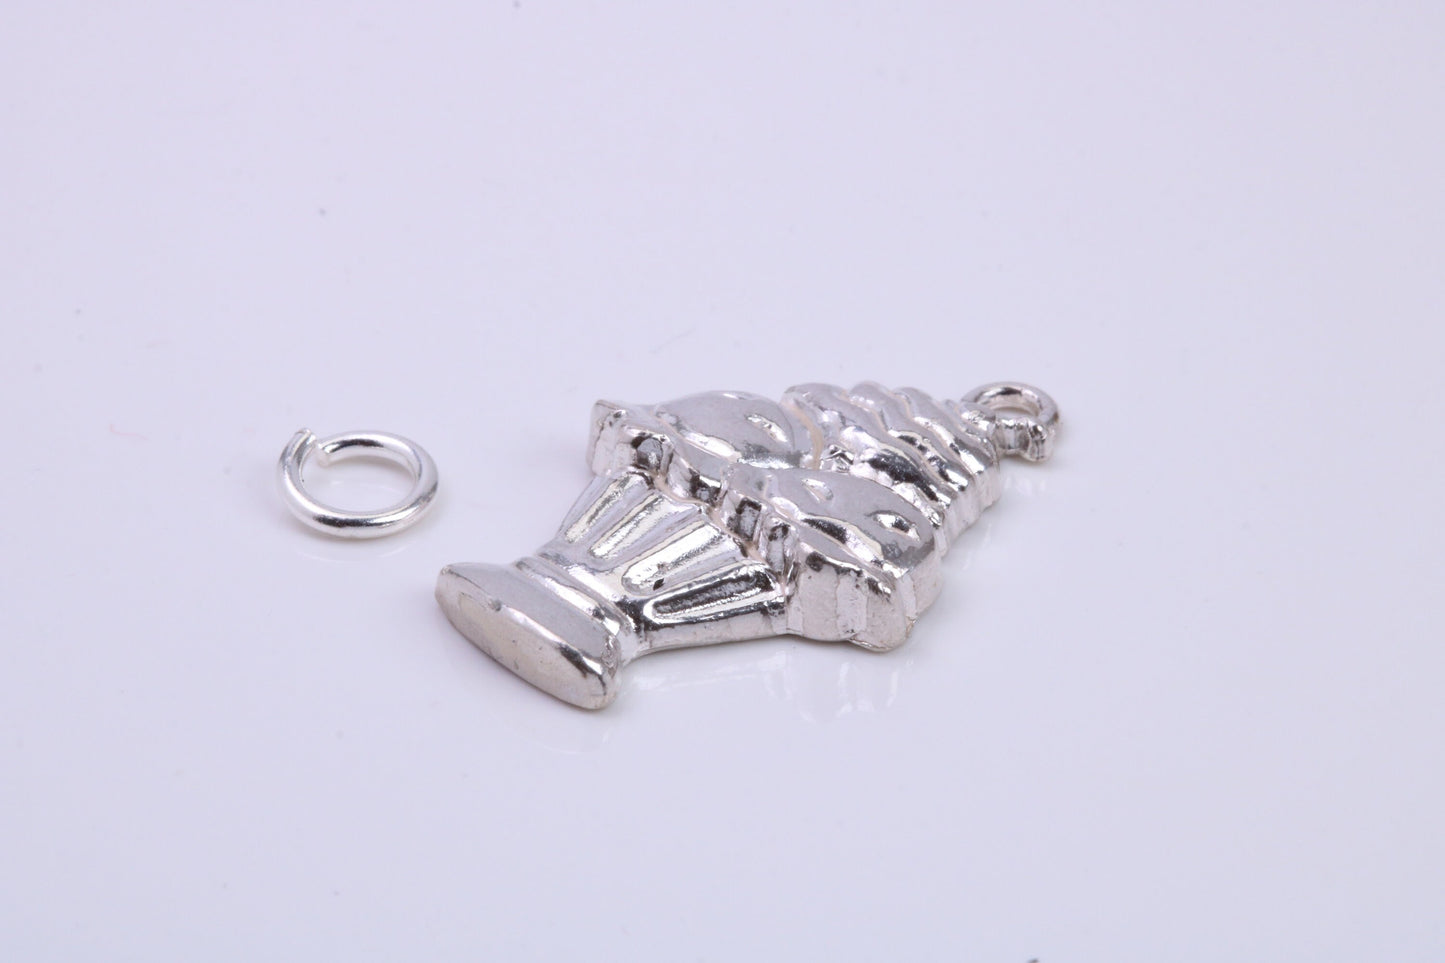 Sundae Charm, Traditional Charm, Made from Solid 925 Grade Sterling Silver, Complete with Attachment Link